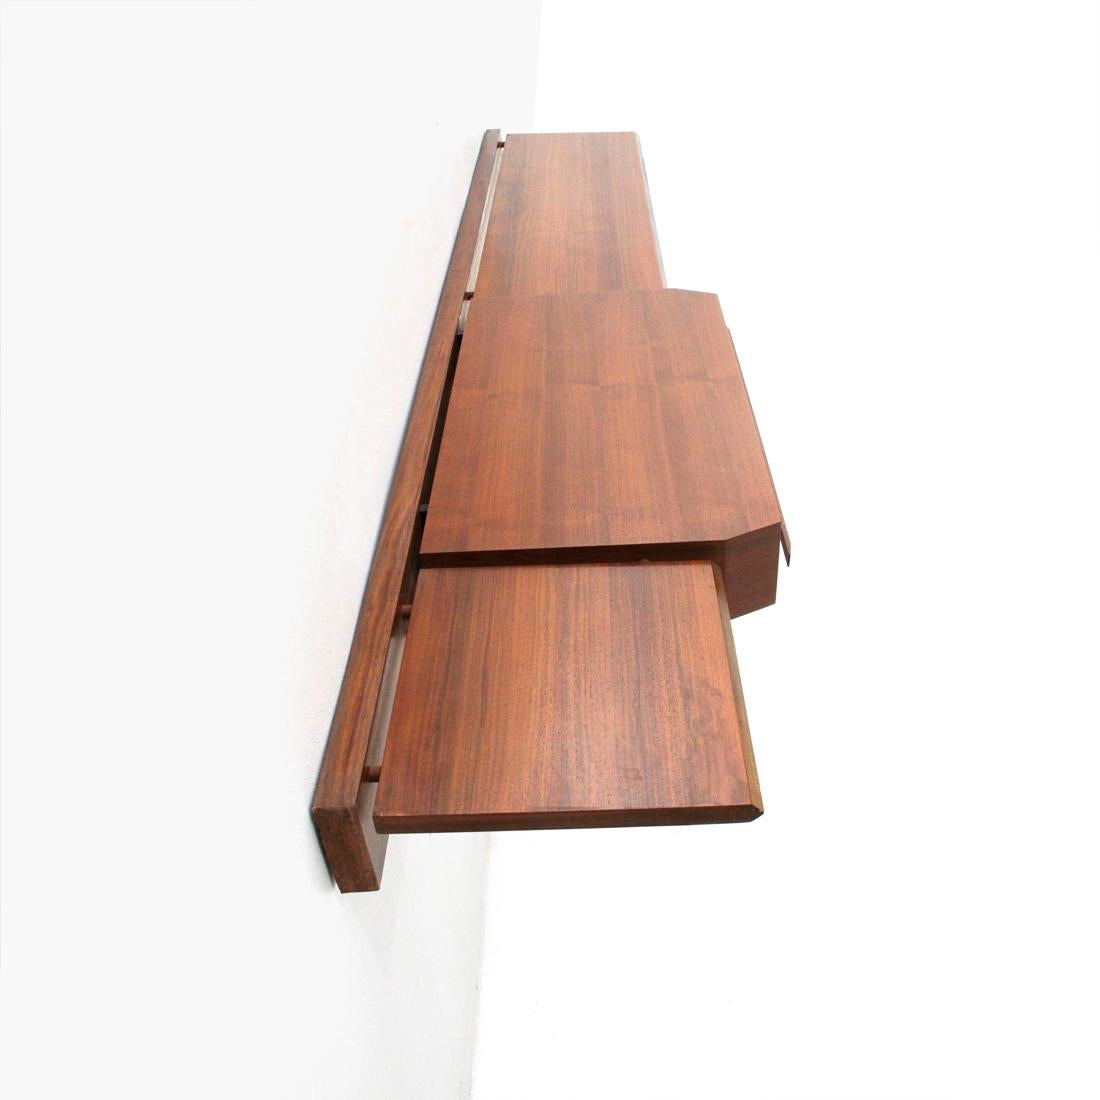 Wood Italian Midcentury Console by Dino Cavalli for Tredici, 1950s